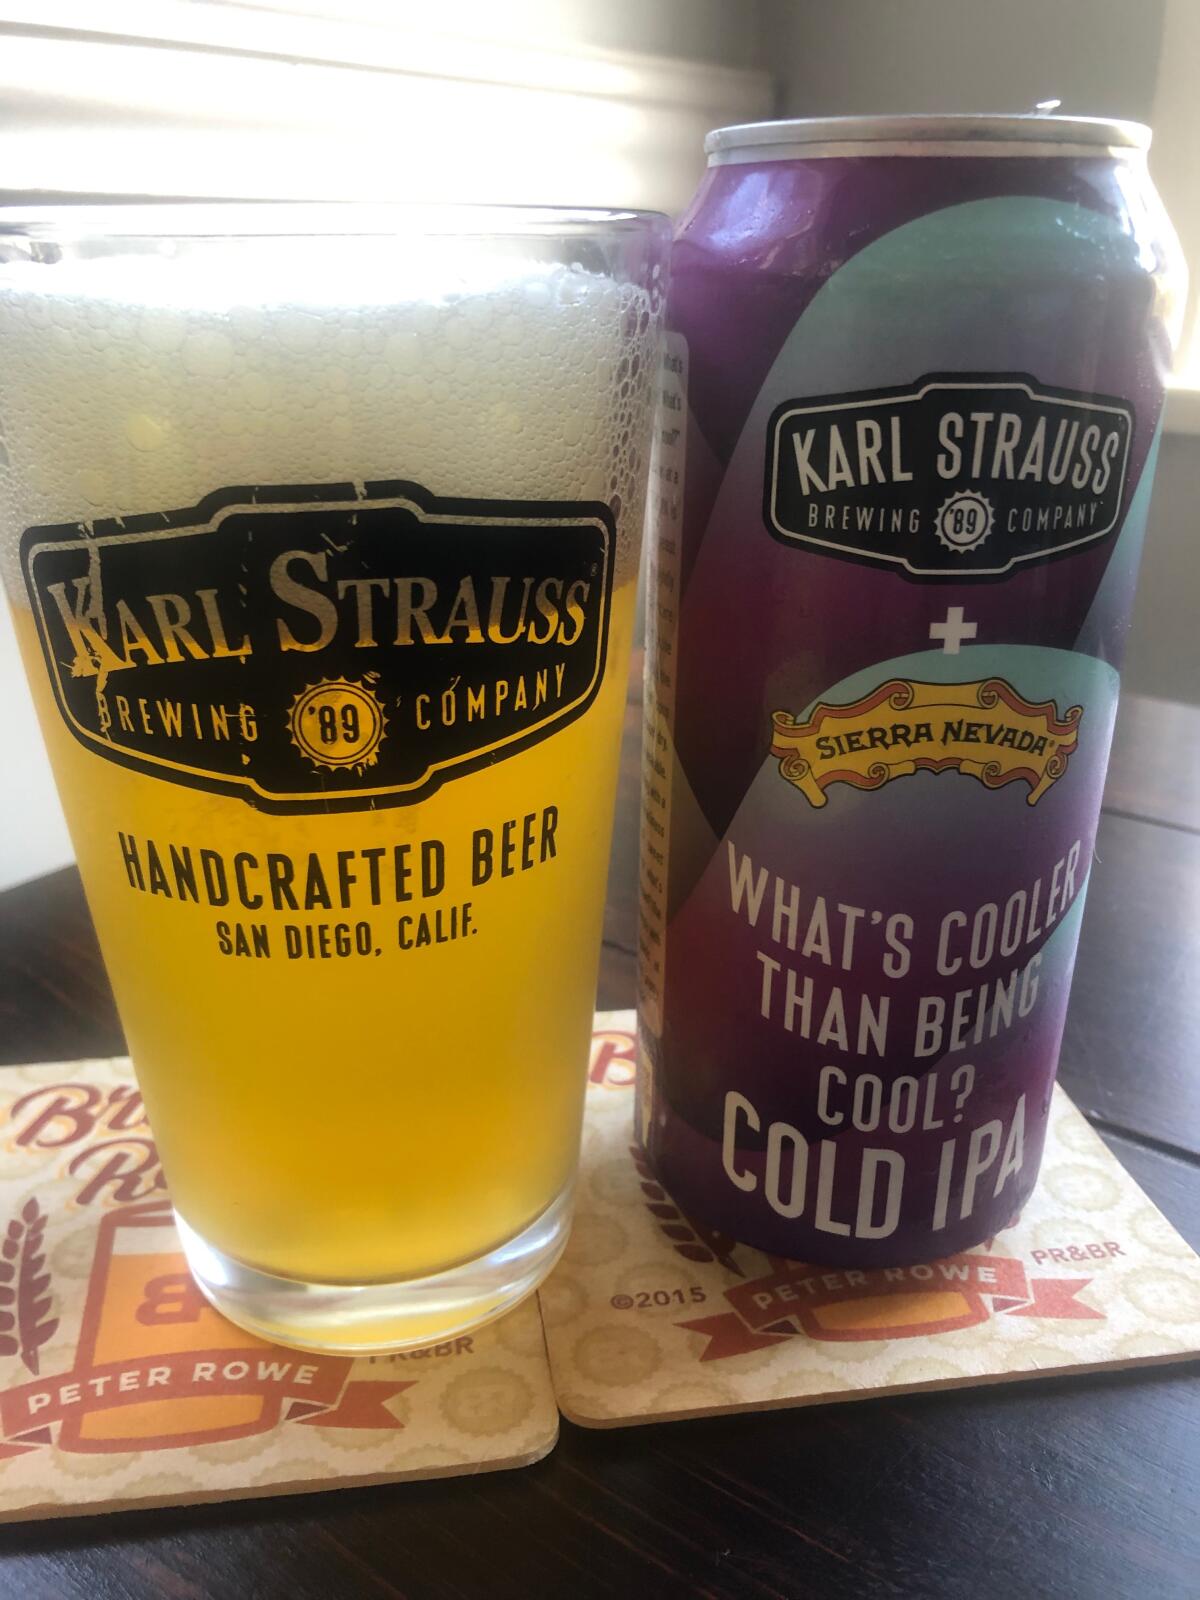 What's Cooler than Being Cool? beer by Karl Strauss and Sierra Nevada